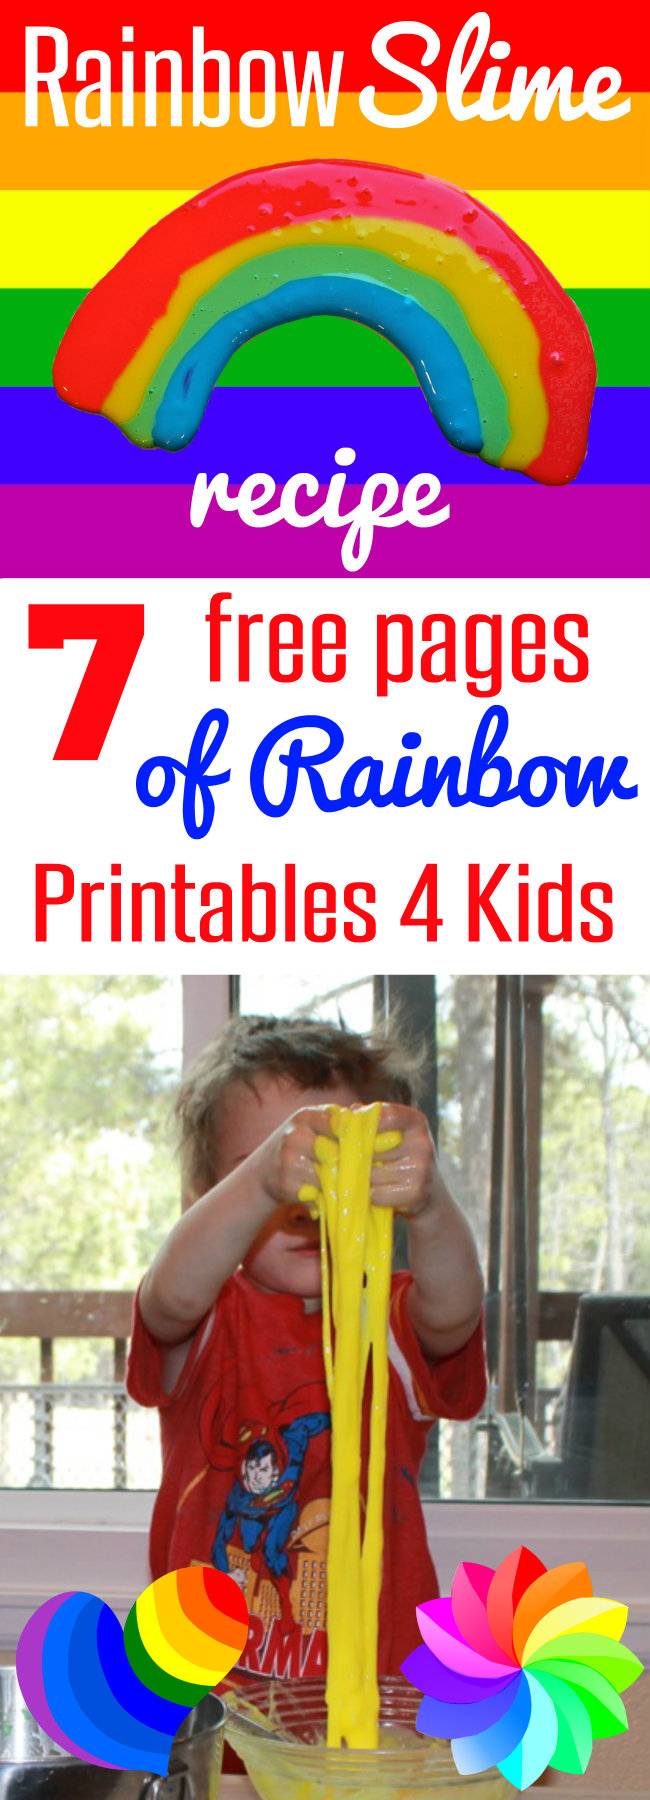 Rainbow Slime Recipe with 7 Free Pages of Rainbow printables for Kids from HappyandBlessedHome.com